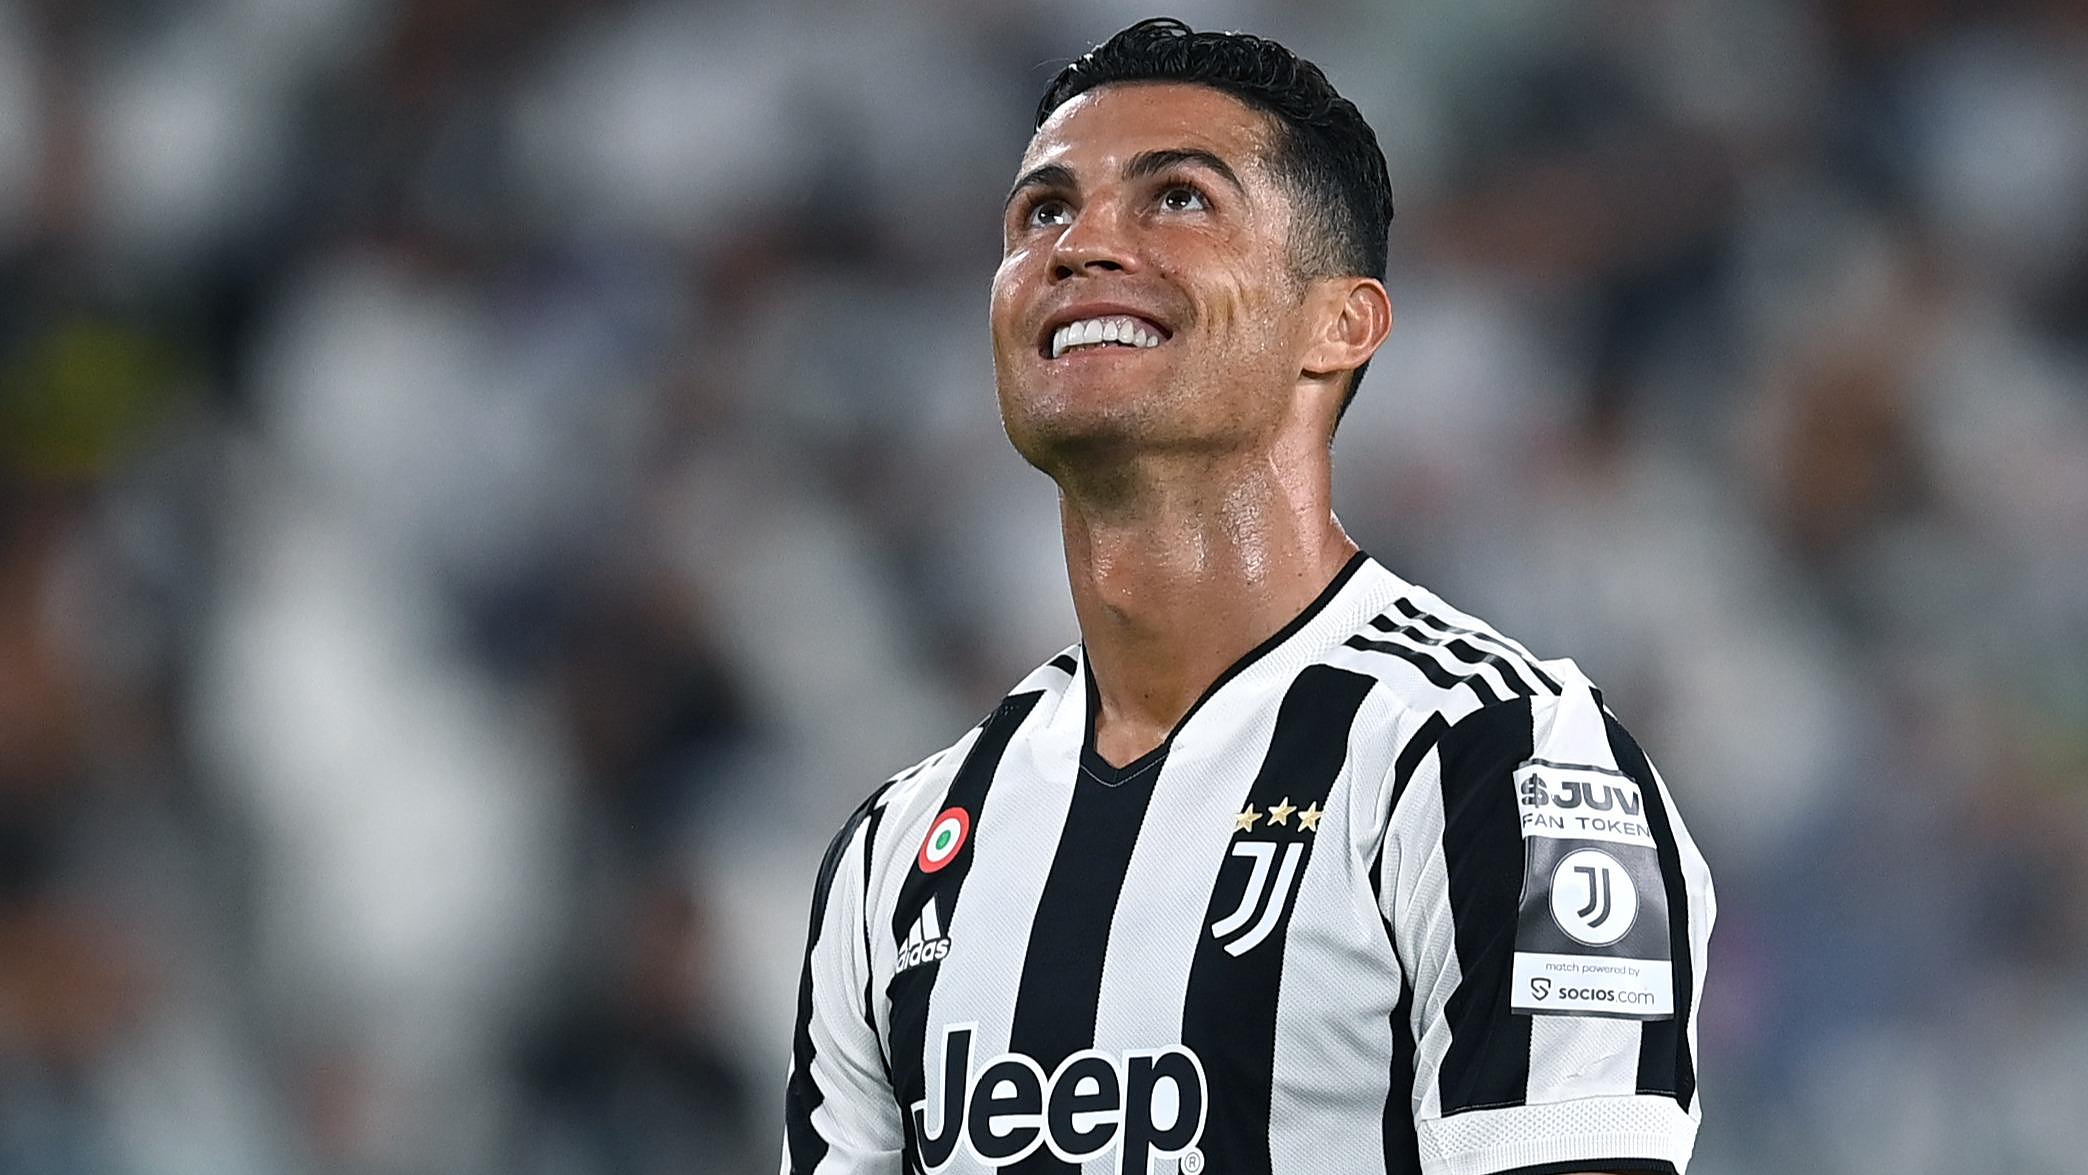 Serie A: Juventus Turin ordered to pay Cristiano Ronaldo €9.7 million in salary arrears